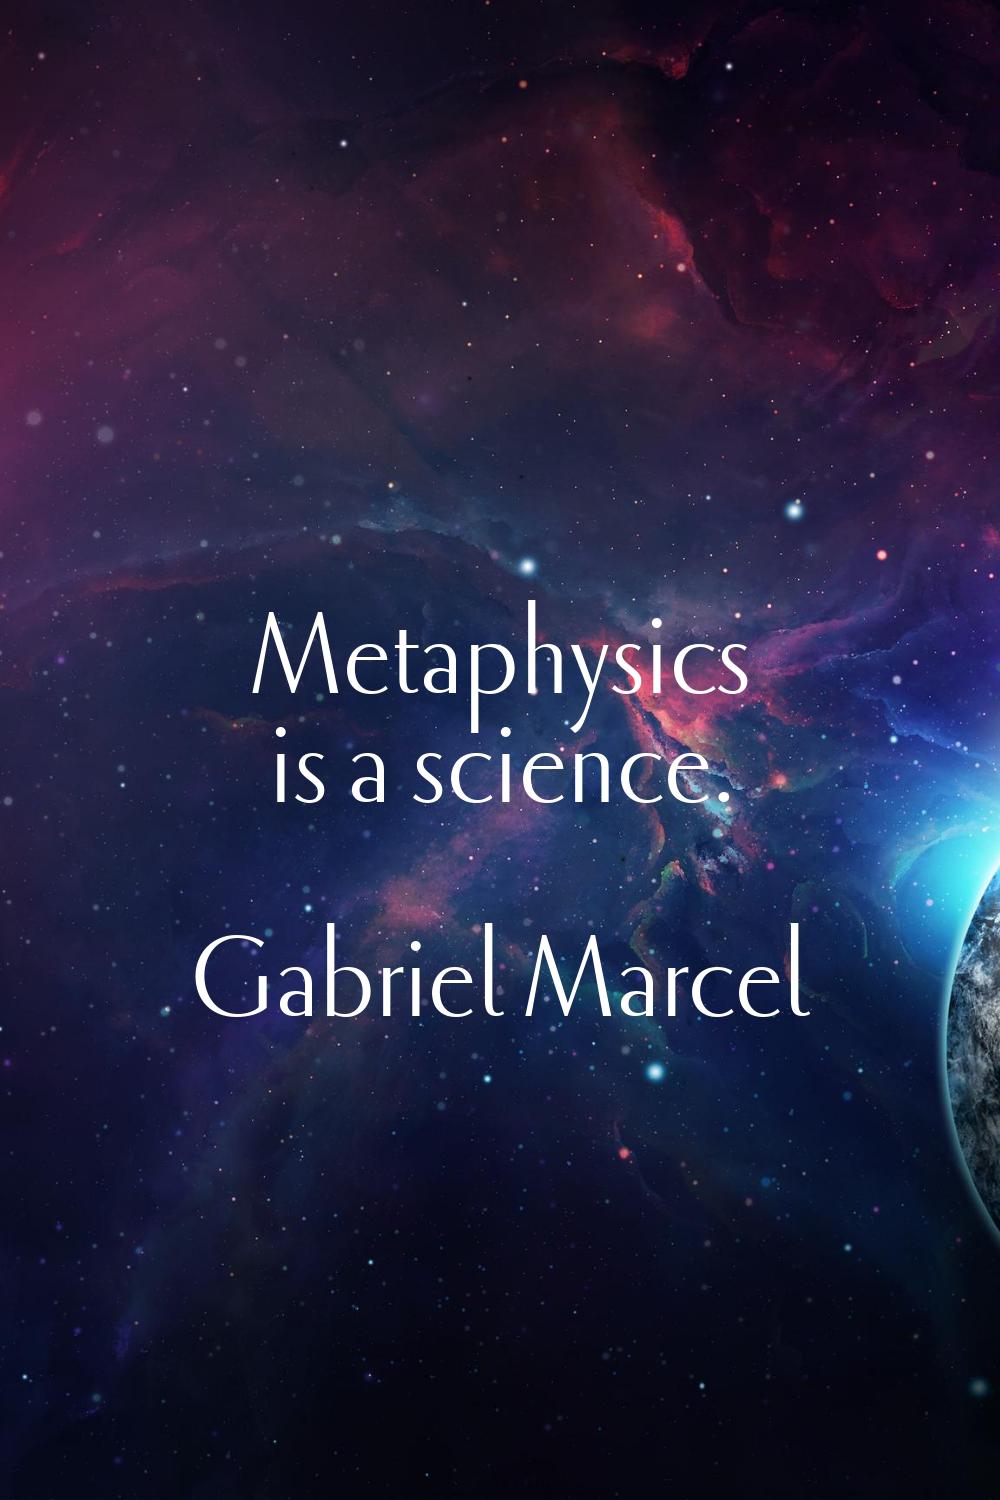 Metaphysics is a science.